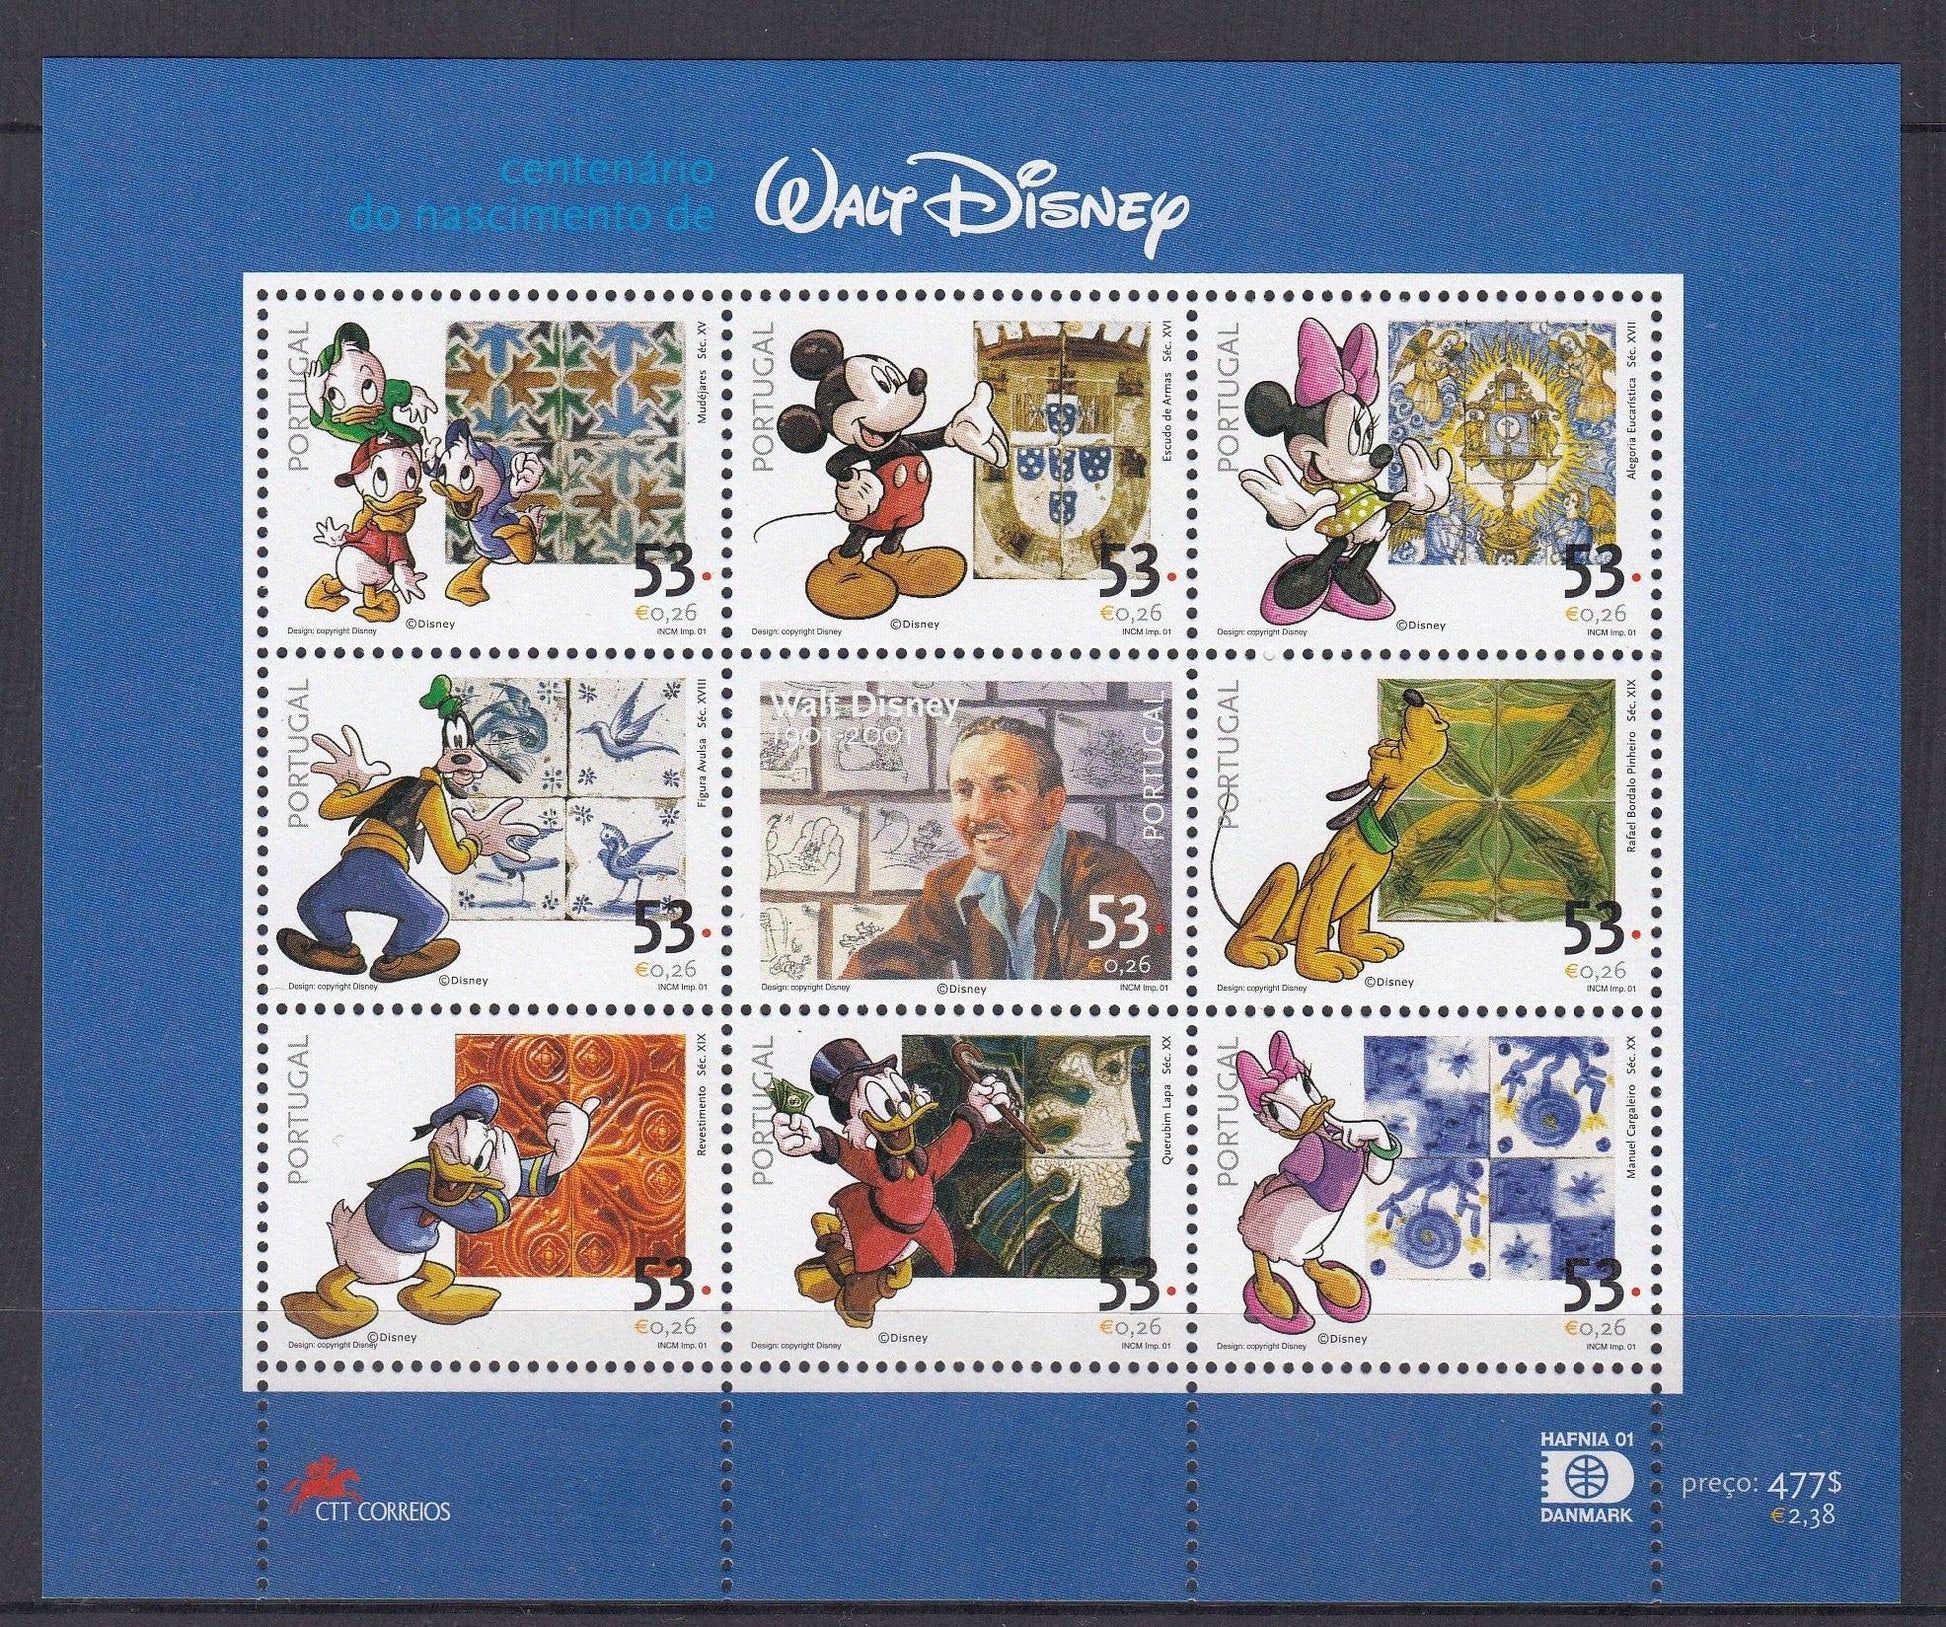 Portugal 2001 - €4.77 100th Birthday of Walt Disney Miniature Sheet - Mint Unhinged - Loose Change Coins